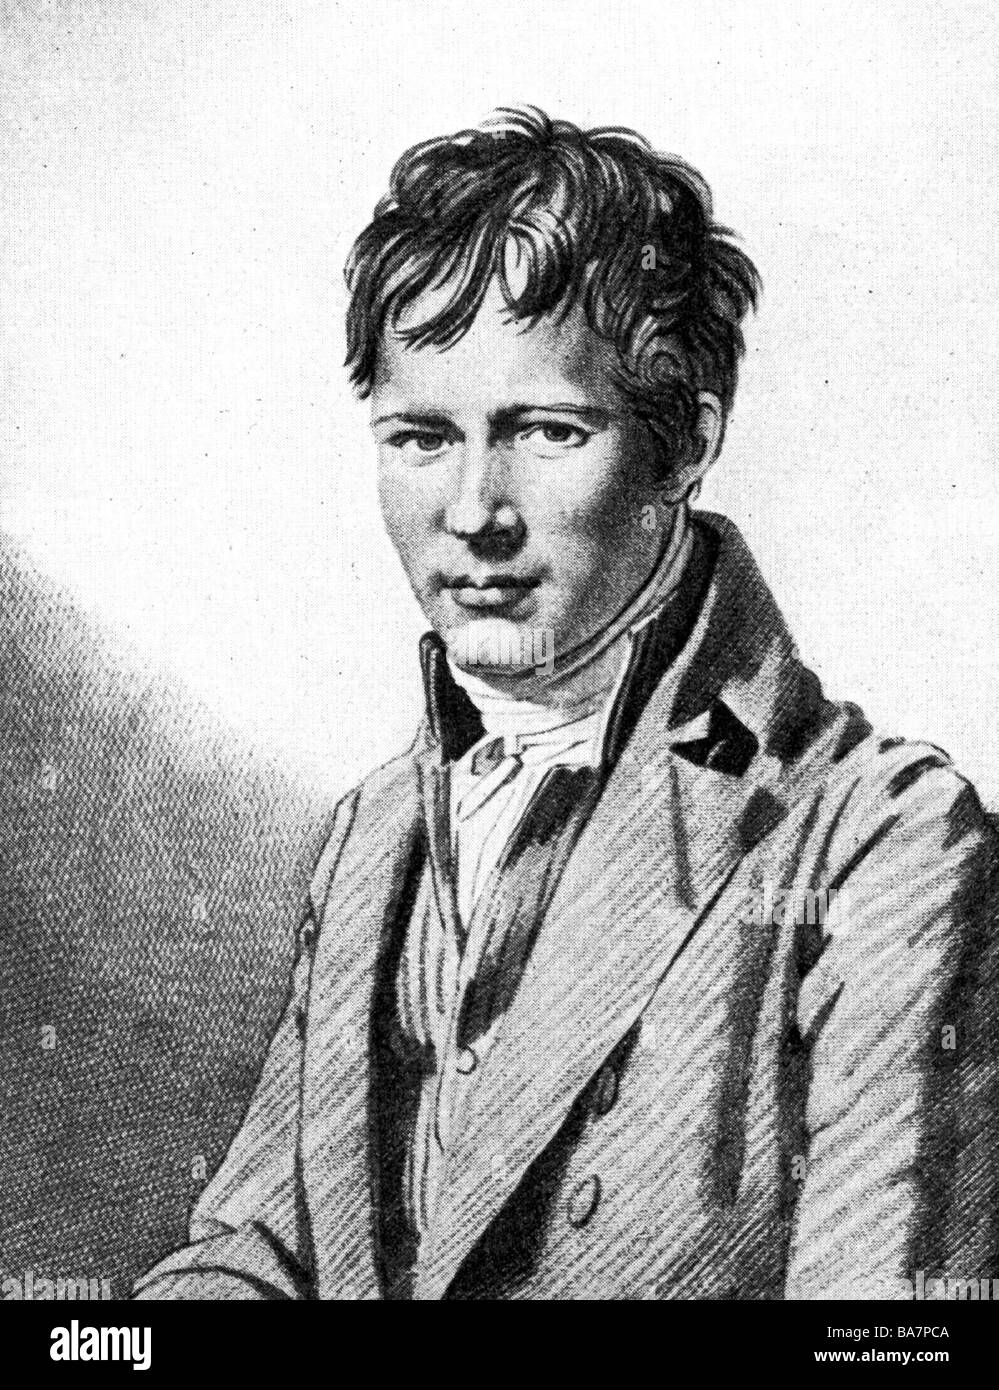 Humboldt, Alexander von, 14.9.1769 - 6.5.1859, German scientist (naturalist and geographer), portrait, as young man, engraving by A. Denoyers, after painting by Friedrich Gerard, 1805, , Stock Photo